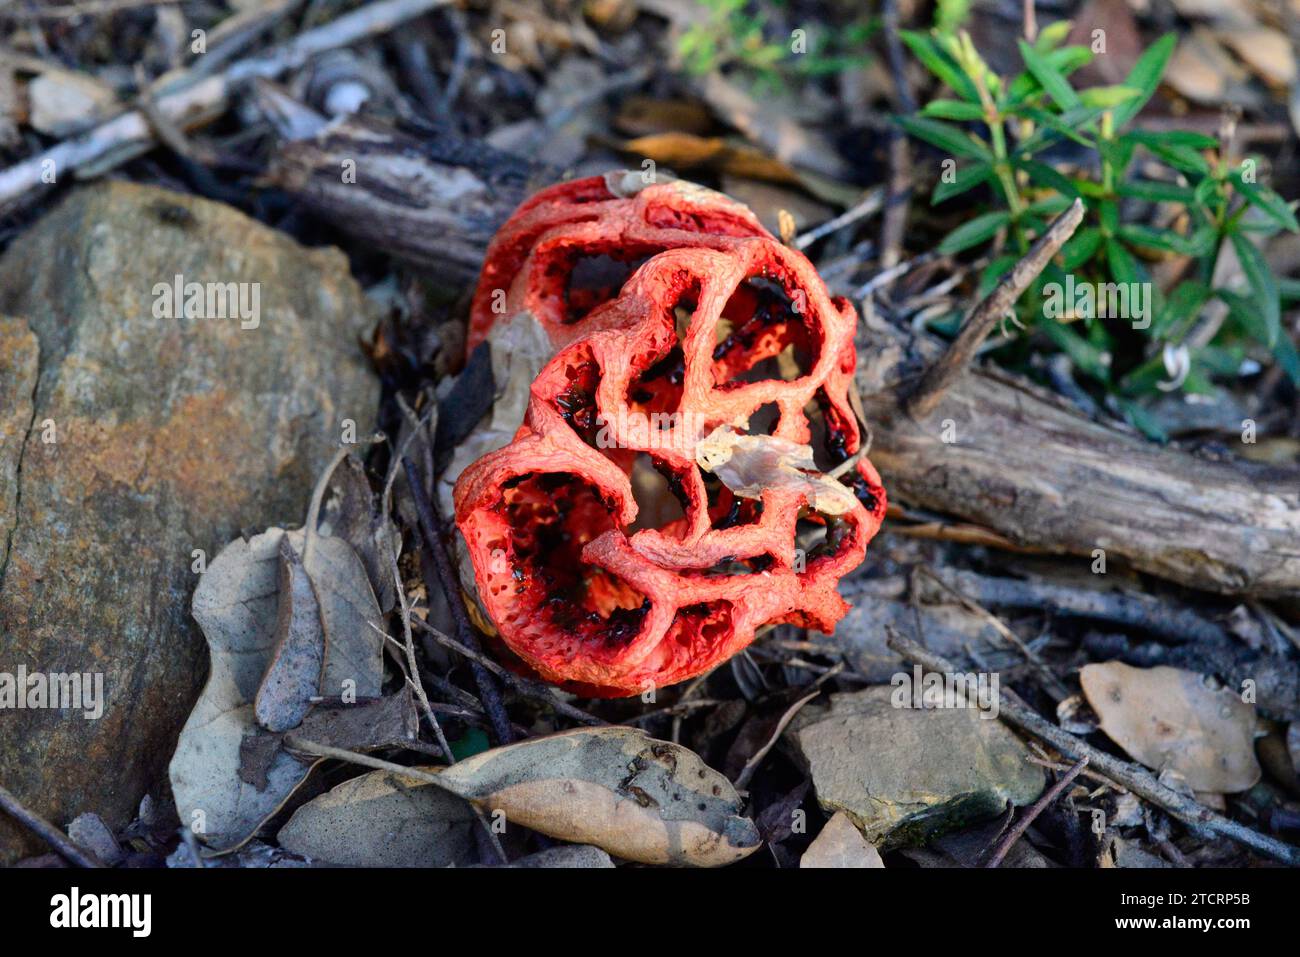 Basket stinkhorn (Clathrus ruber) is a saprobic fungus. This photo was taken in Montseny Biosphere Reserve, Barcelona province, Catalonia, Spain. Stock Photo